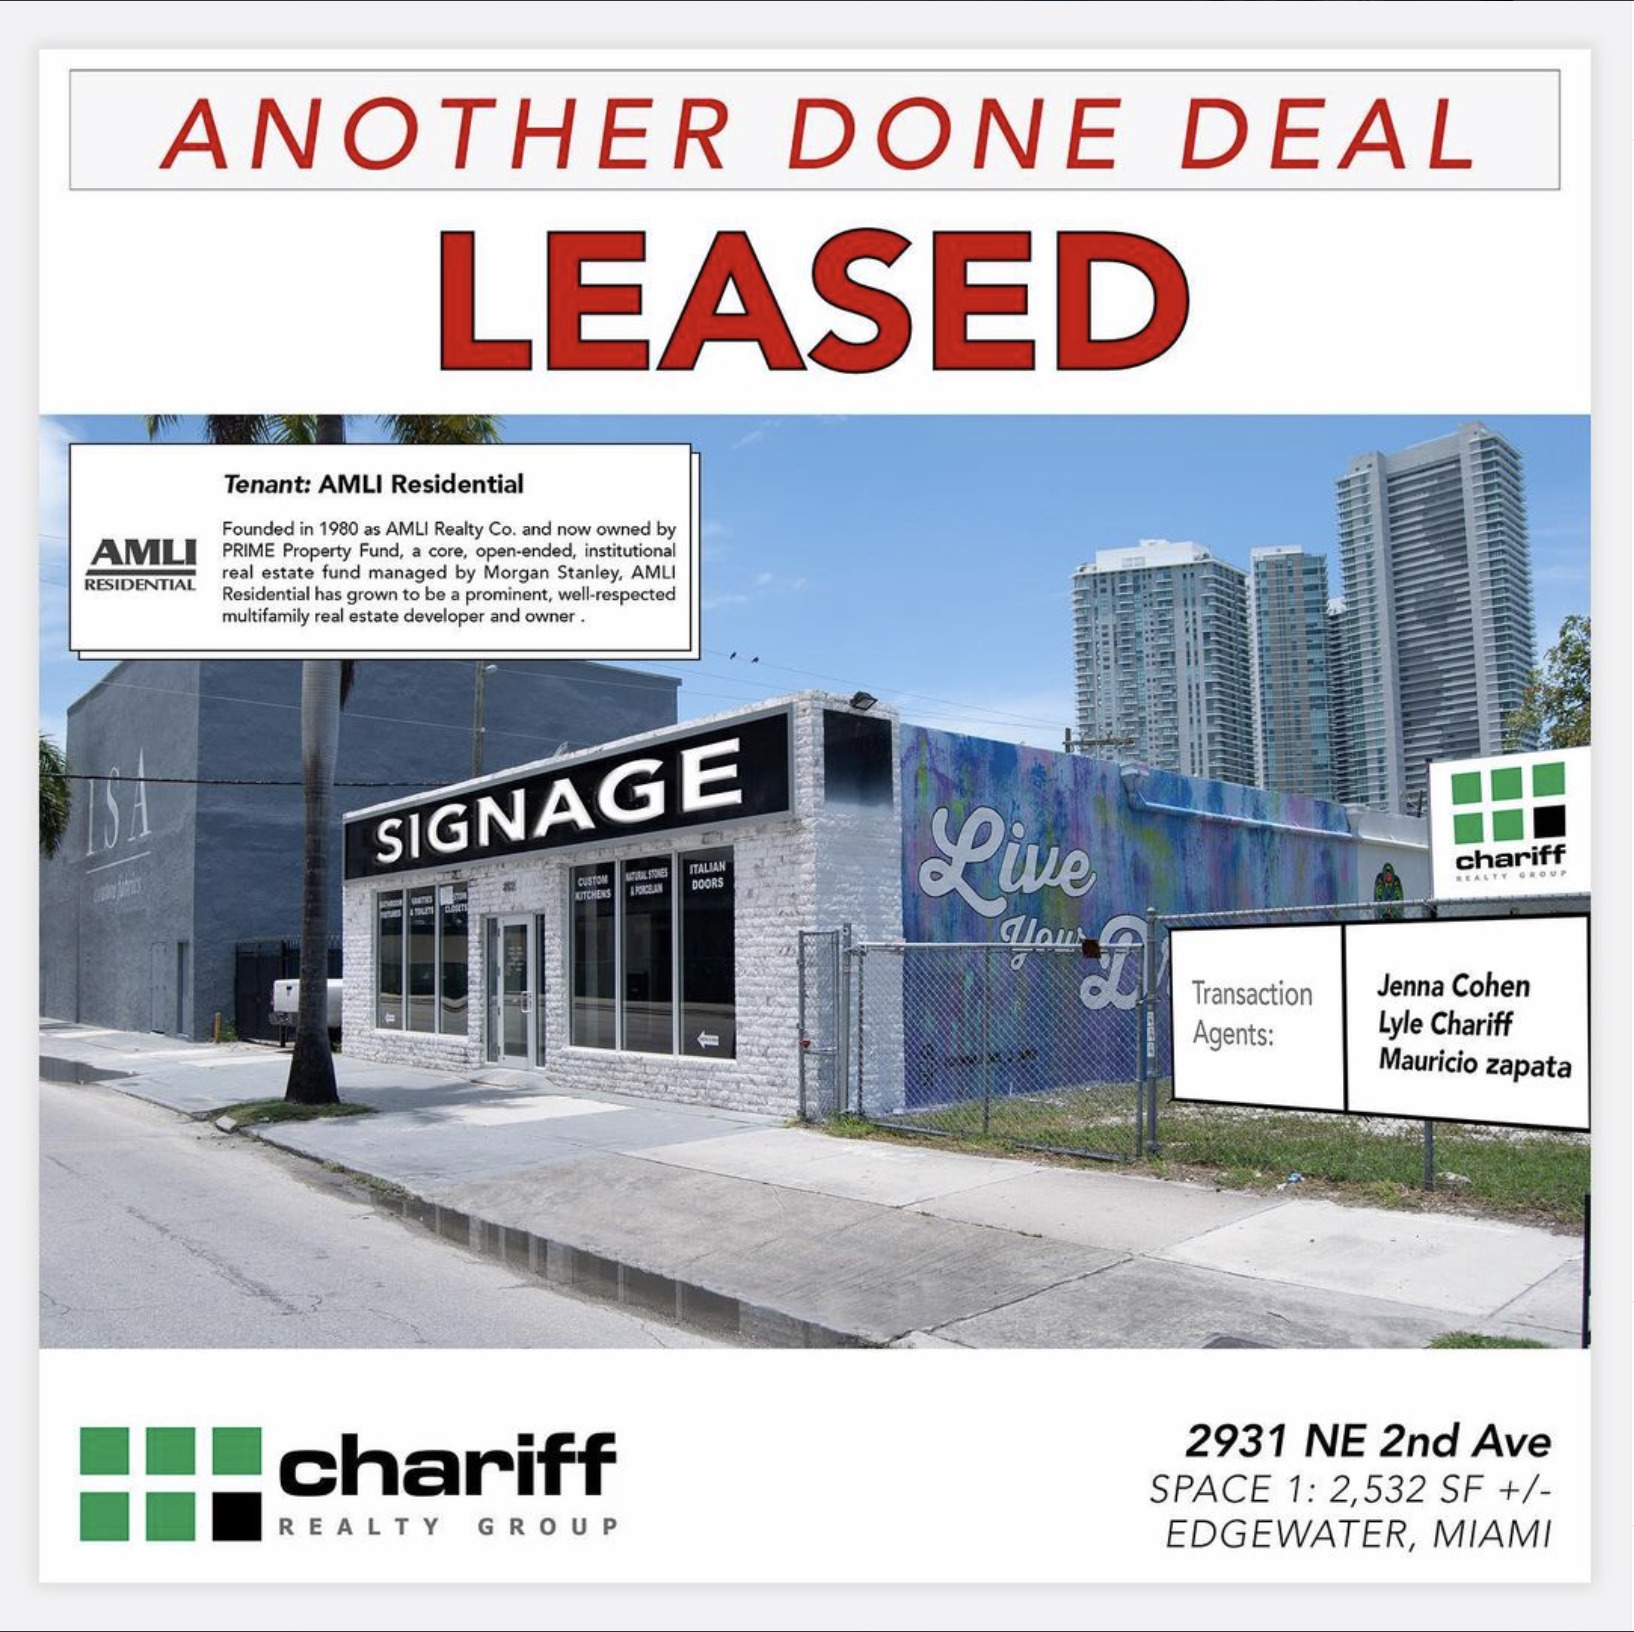 2931 NE 2nd Ave - Edgewater Miami - Another Done Deal Leased - Chariff Realty Group